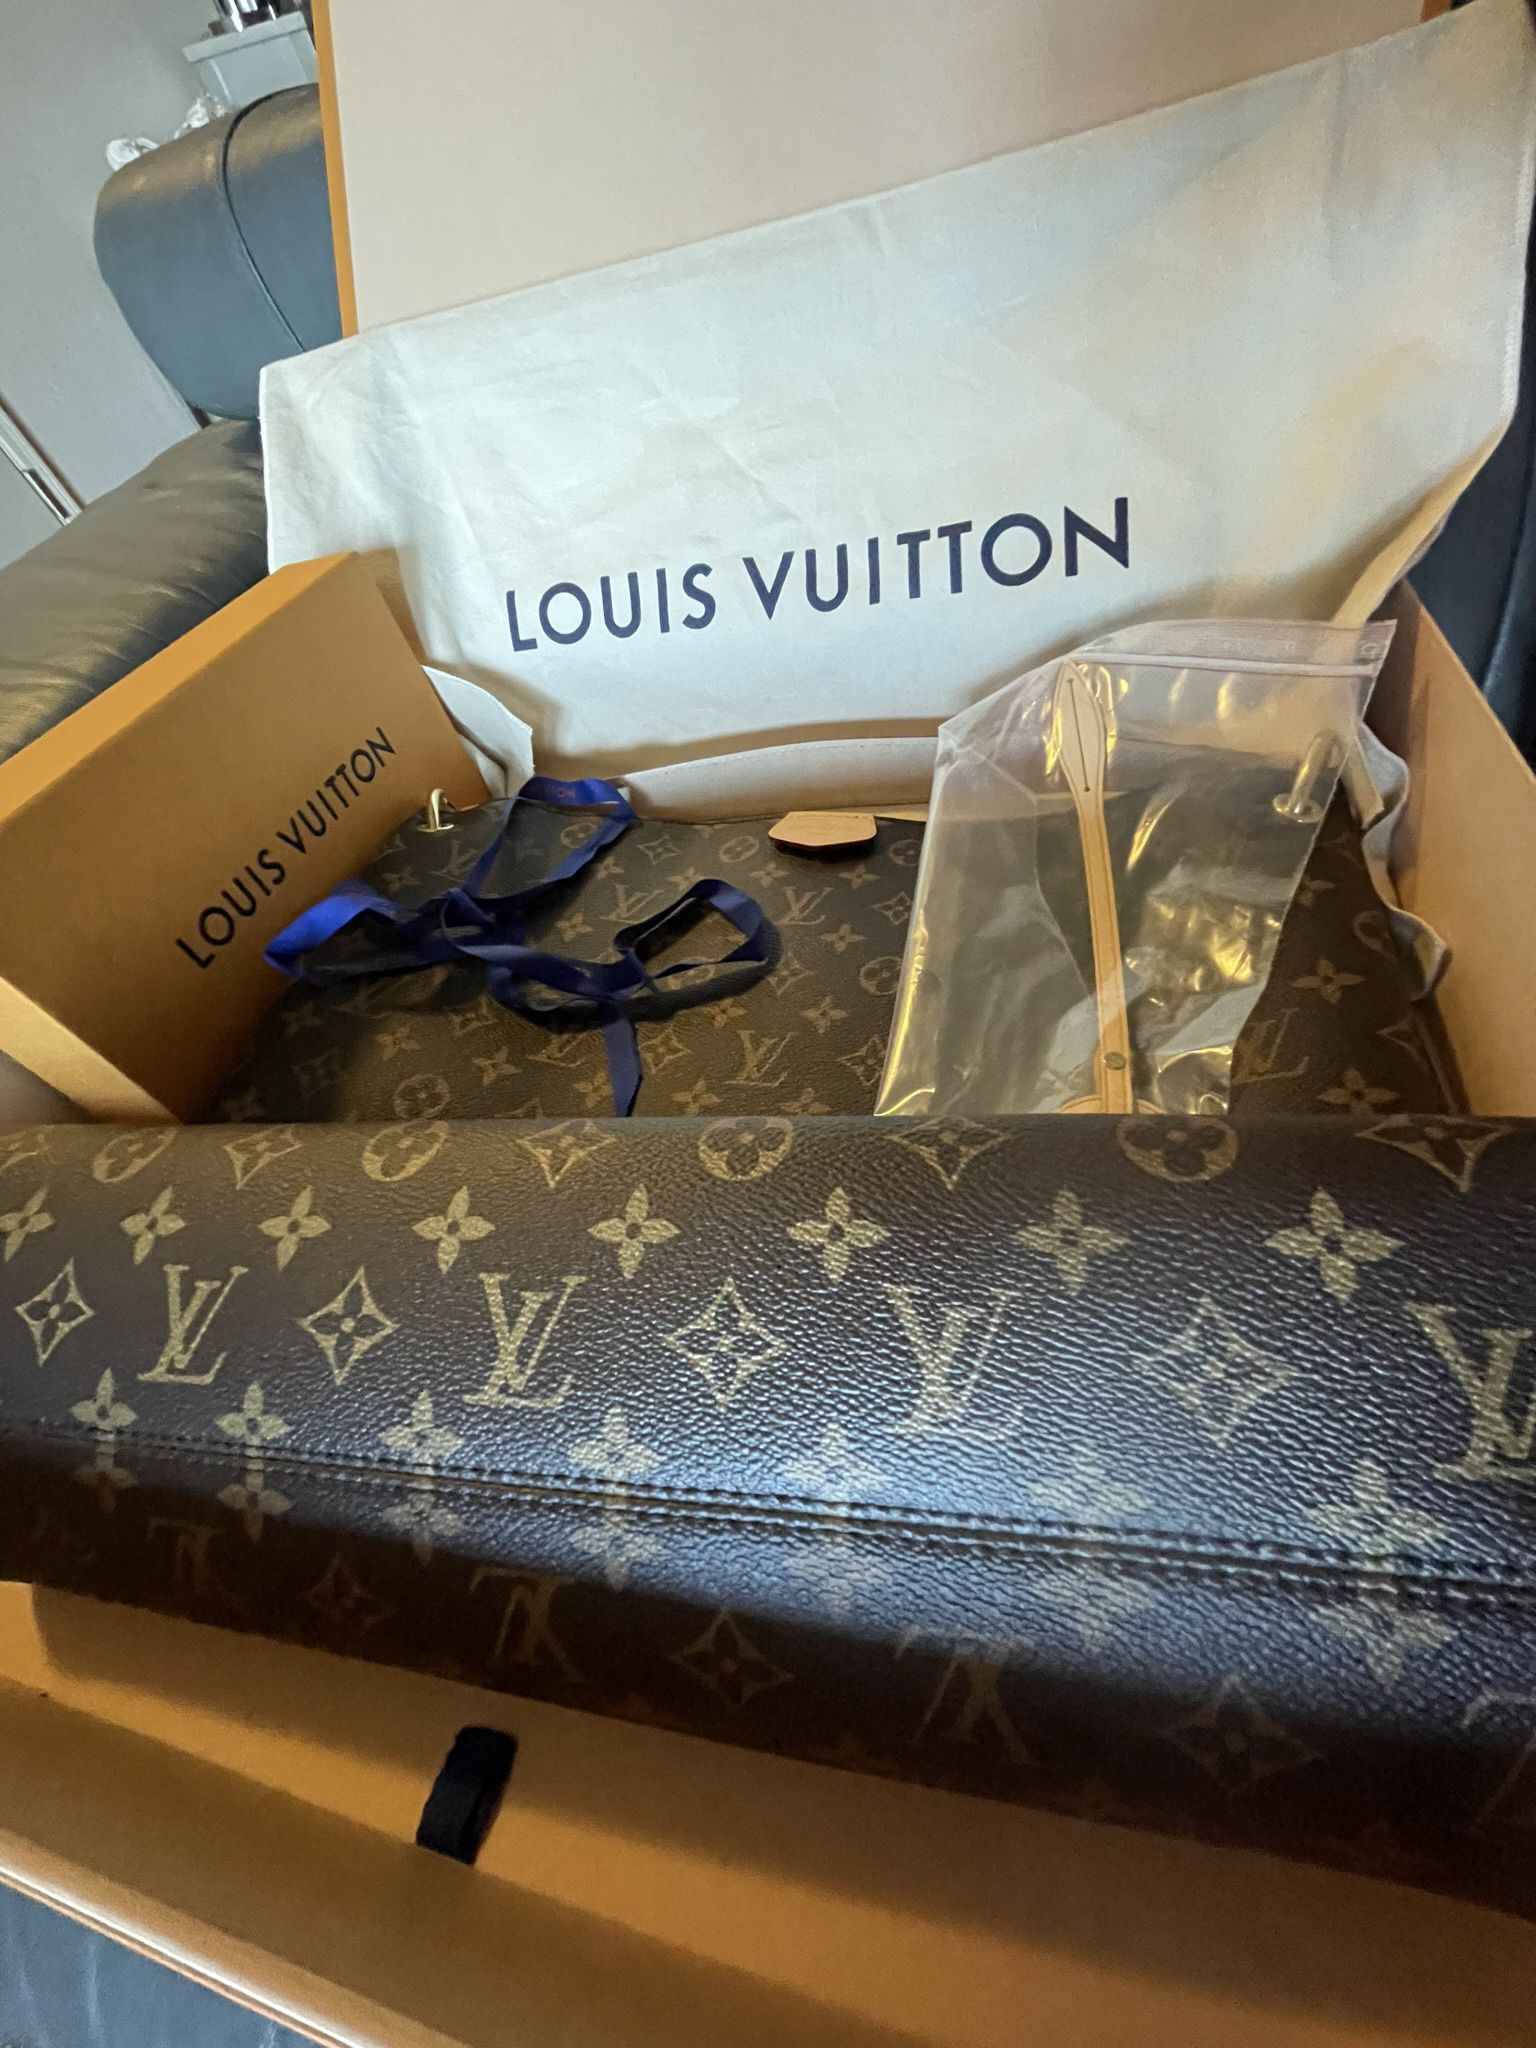 Authentic Louis Vuitton Monogram Alma BB for Sale in Brentwood, CA - OfferUp